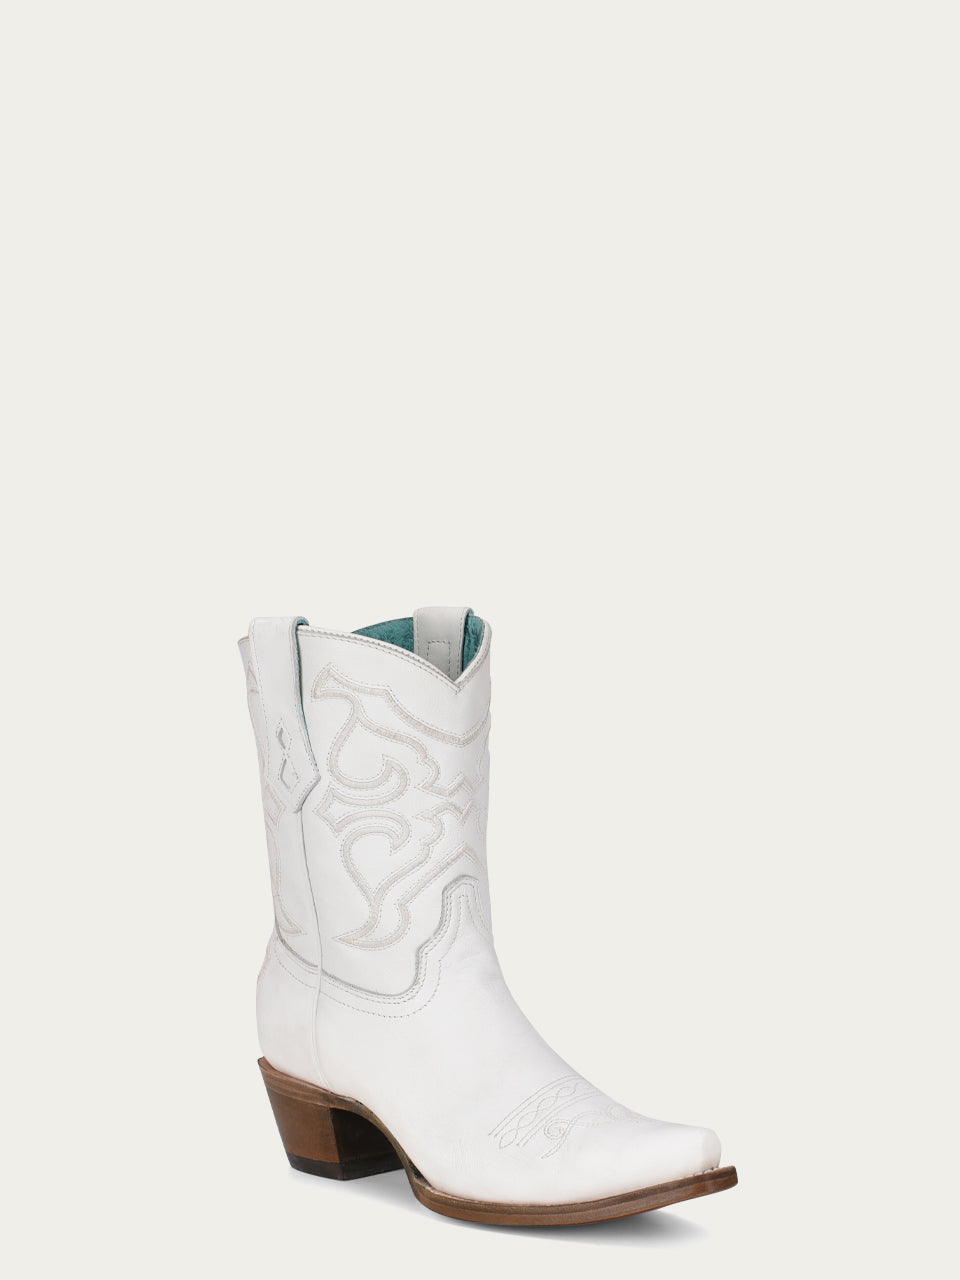 Z5071 - WOMEN'S EMBROIDERY WHITE SNIP TOE ANKLE BOOT